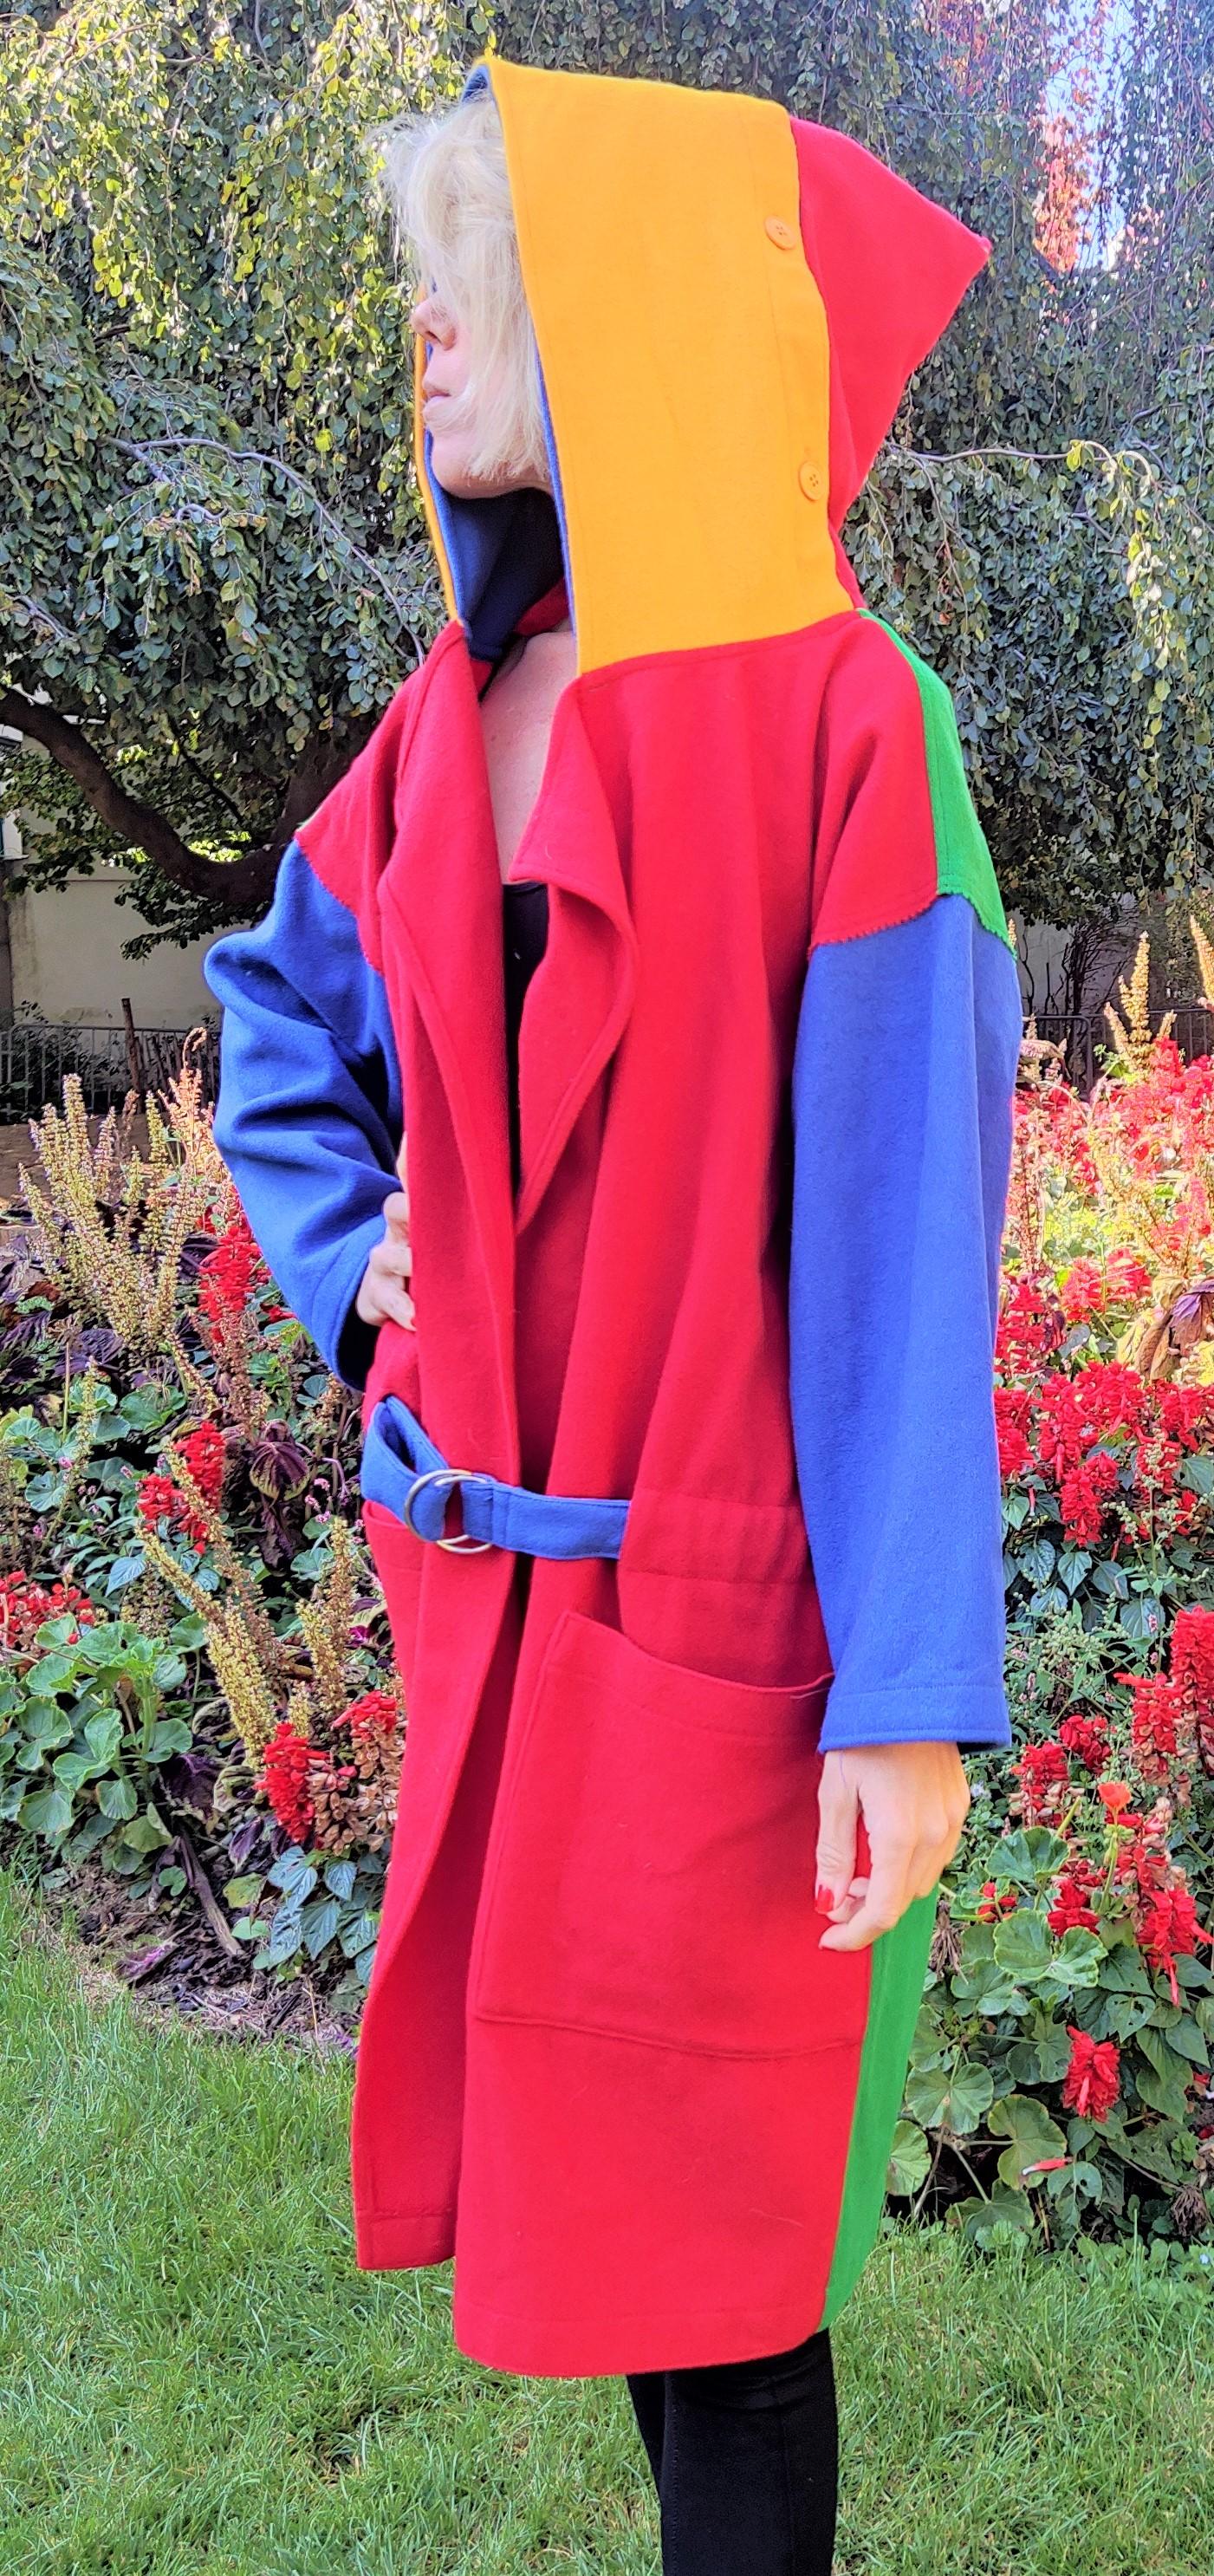 JC de Castelbajac color block coat with hood!
From the eraly Castelbajac`s years!
Wonderful colors!
Wool!
2 front pockets!

EXCELLENT CONDITION!

SIZE
One size. Please, read the measurements! Model`s size in the photos: XS. 
Woman: fits from XS to